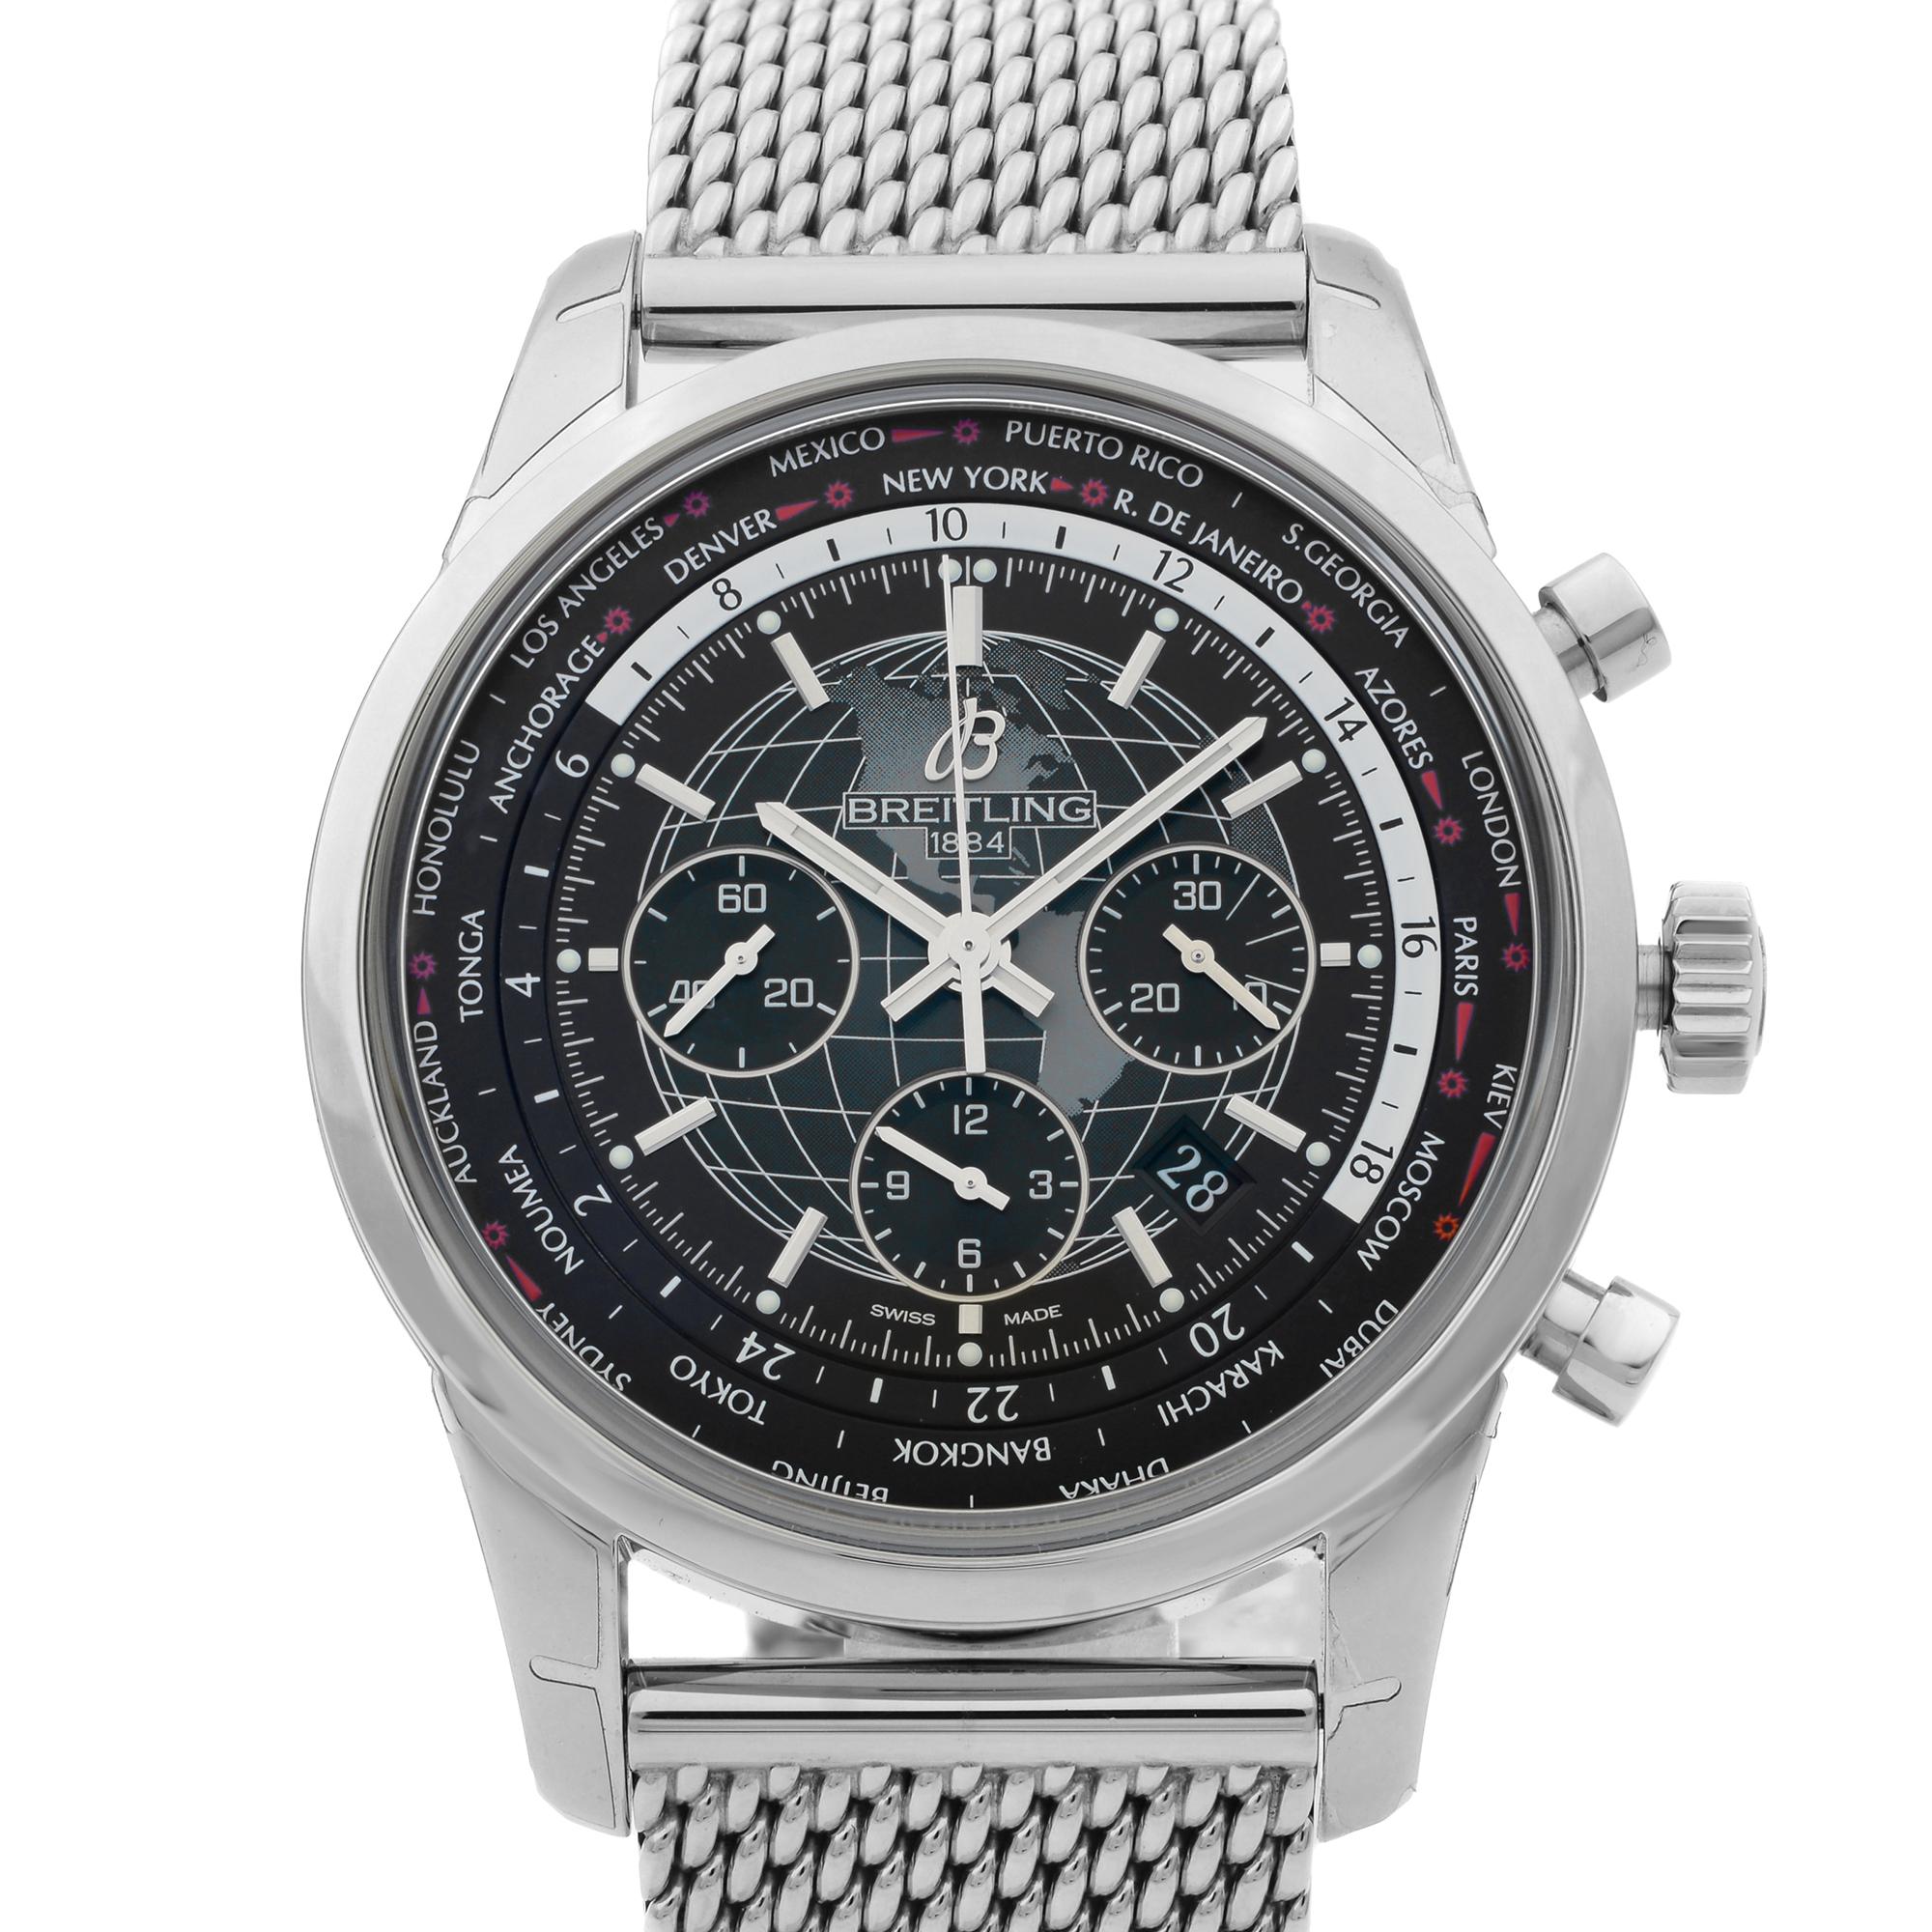 This  never been worn  Breitling Transocean  AB0510U4/BE84-152A is a beautiful men's timepiece that is powered by mechanical (automatic) movement which is cased in a stainless steel case. It has a round shape face, chronograph, date indicator, dual